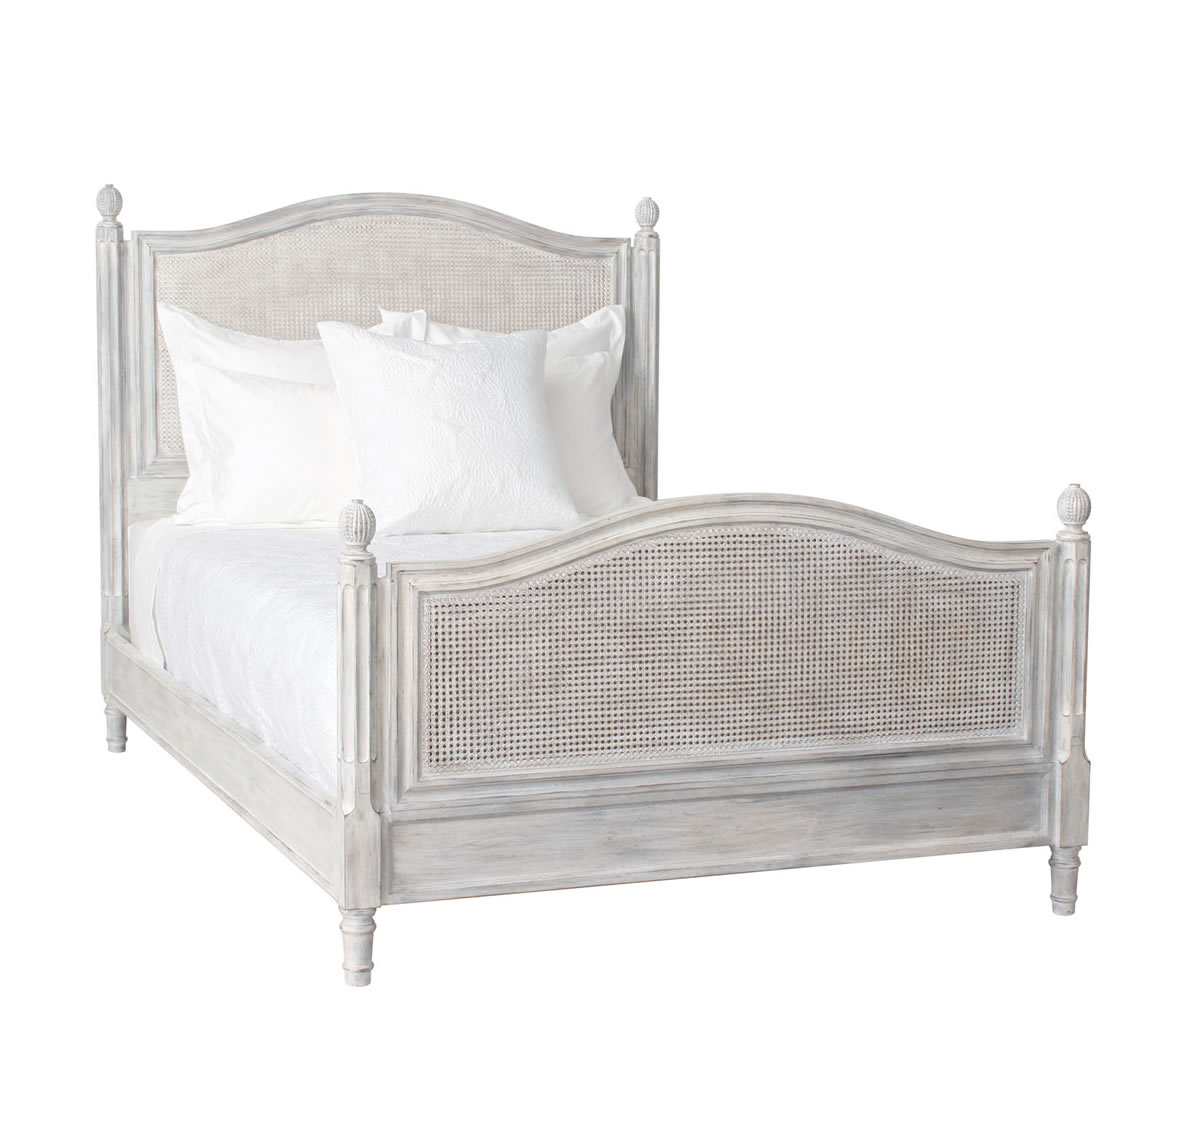 Bed | The Kellogg Collection